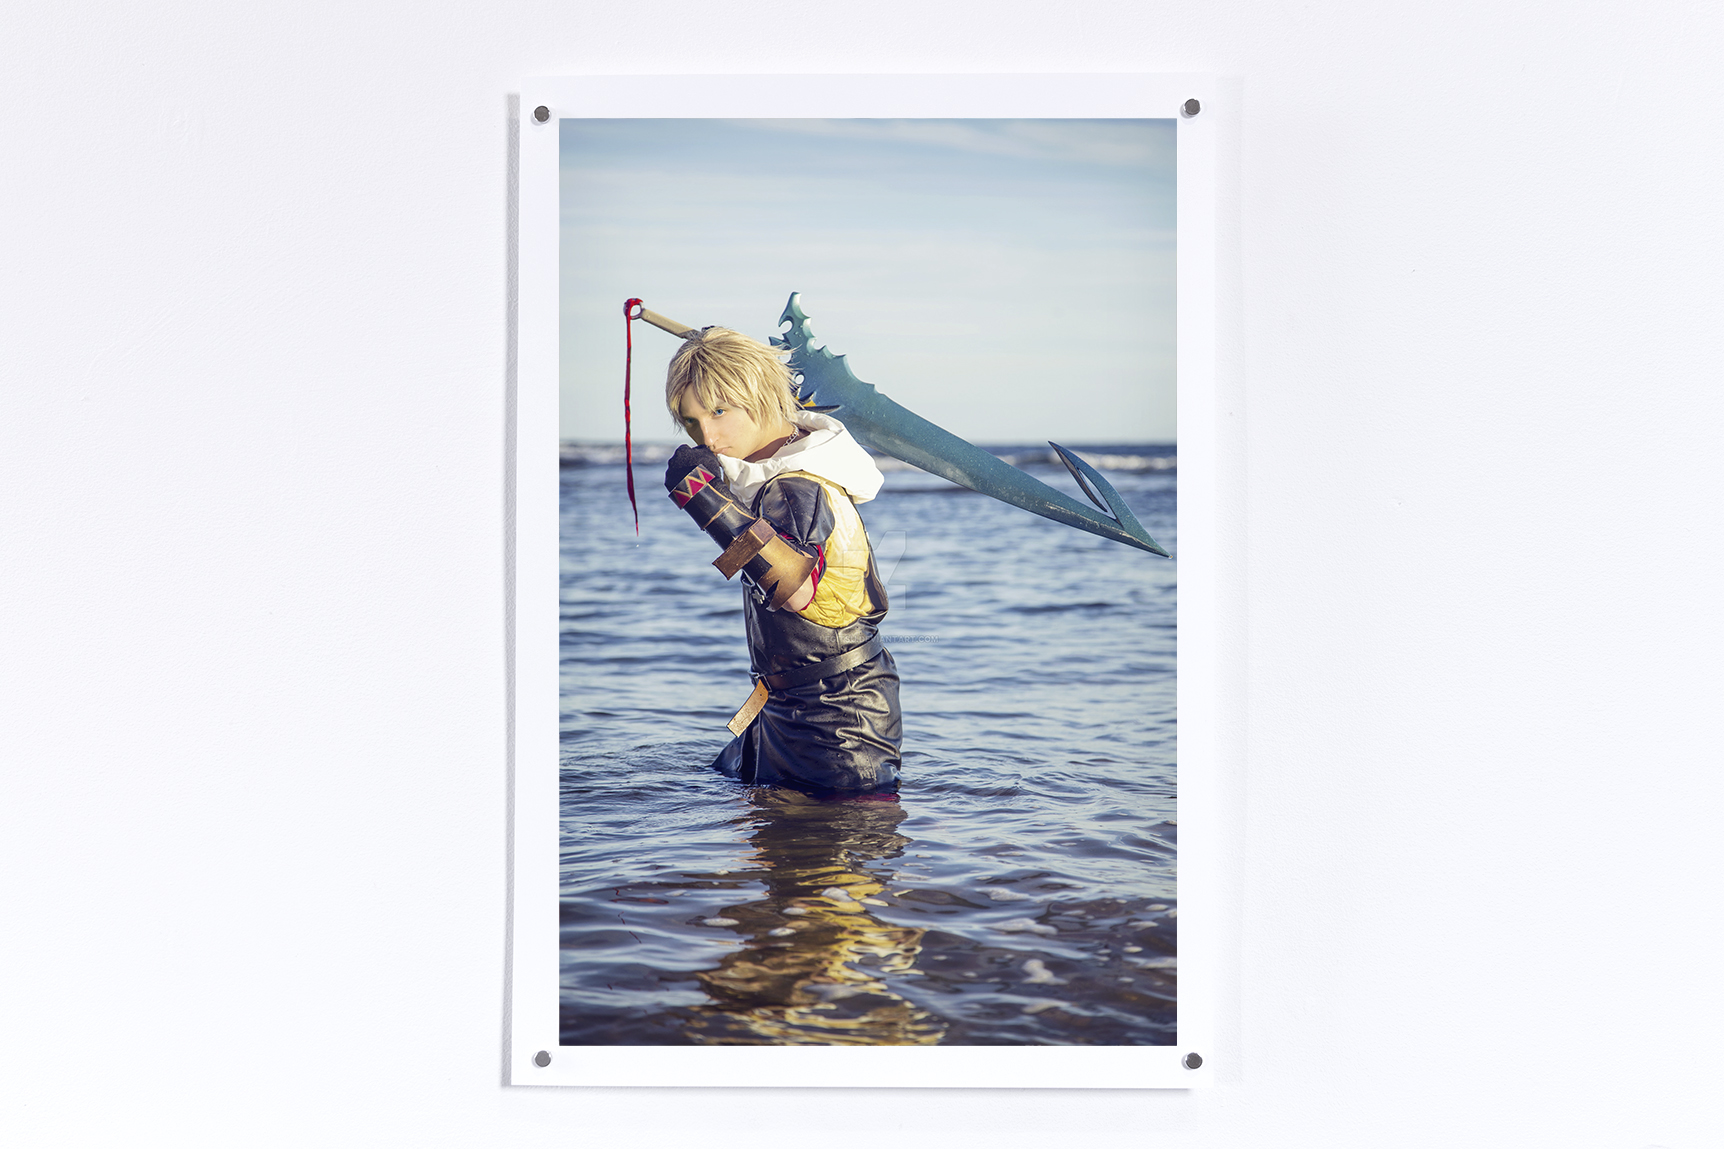 Print hung on a white wall of Tidus from Final Fantasy 10 in he ocean with Jesse's face superimposed on the character